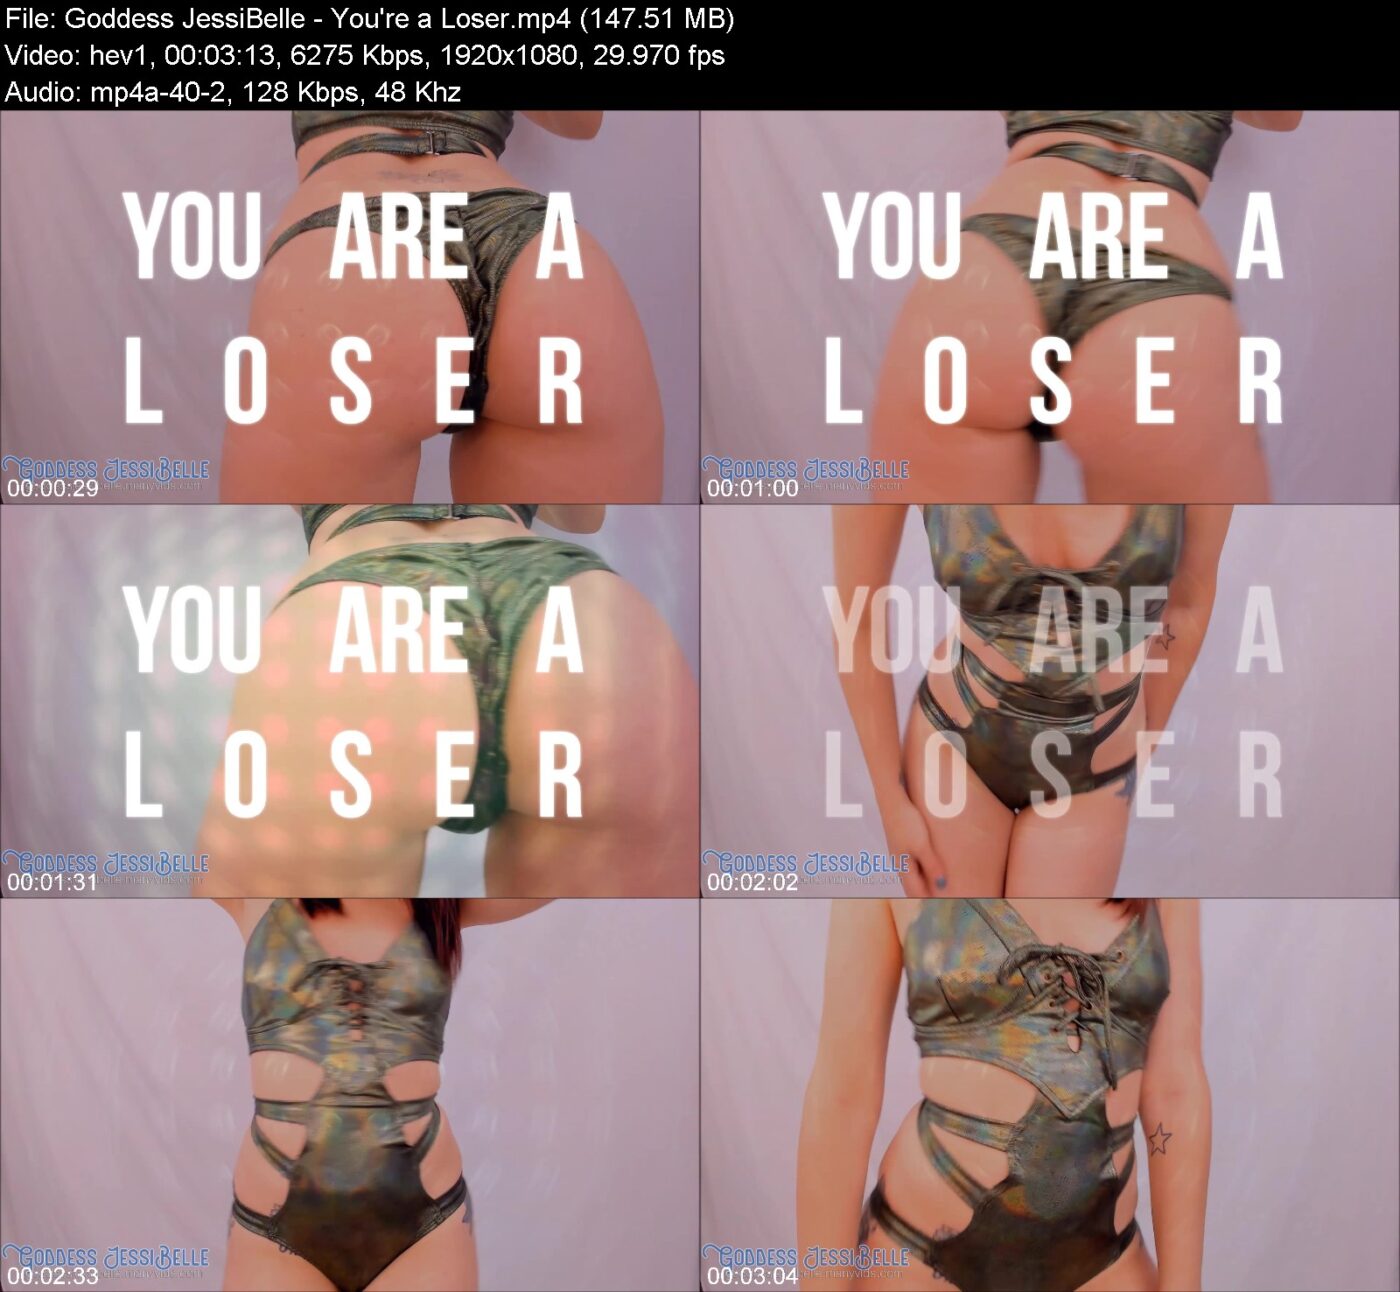 Actress: Goddess JessiBelle. Title and Studio: You’re a Loser